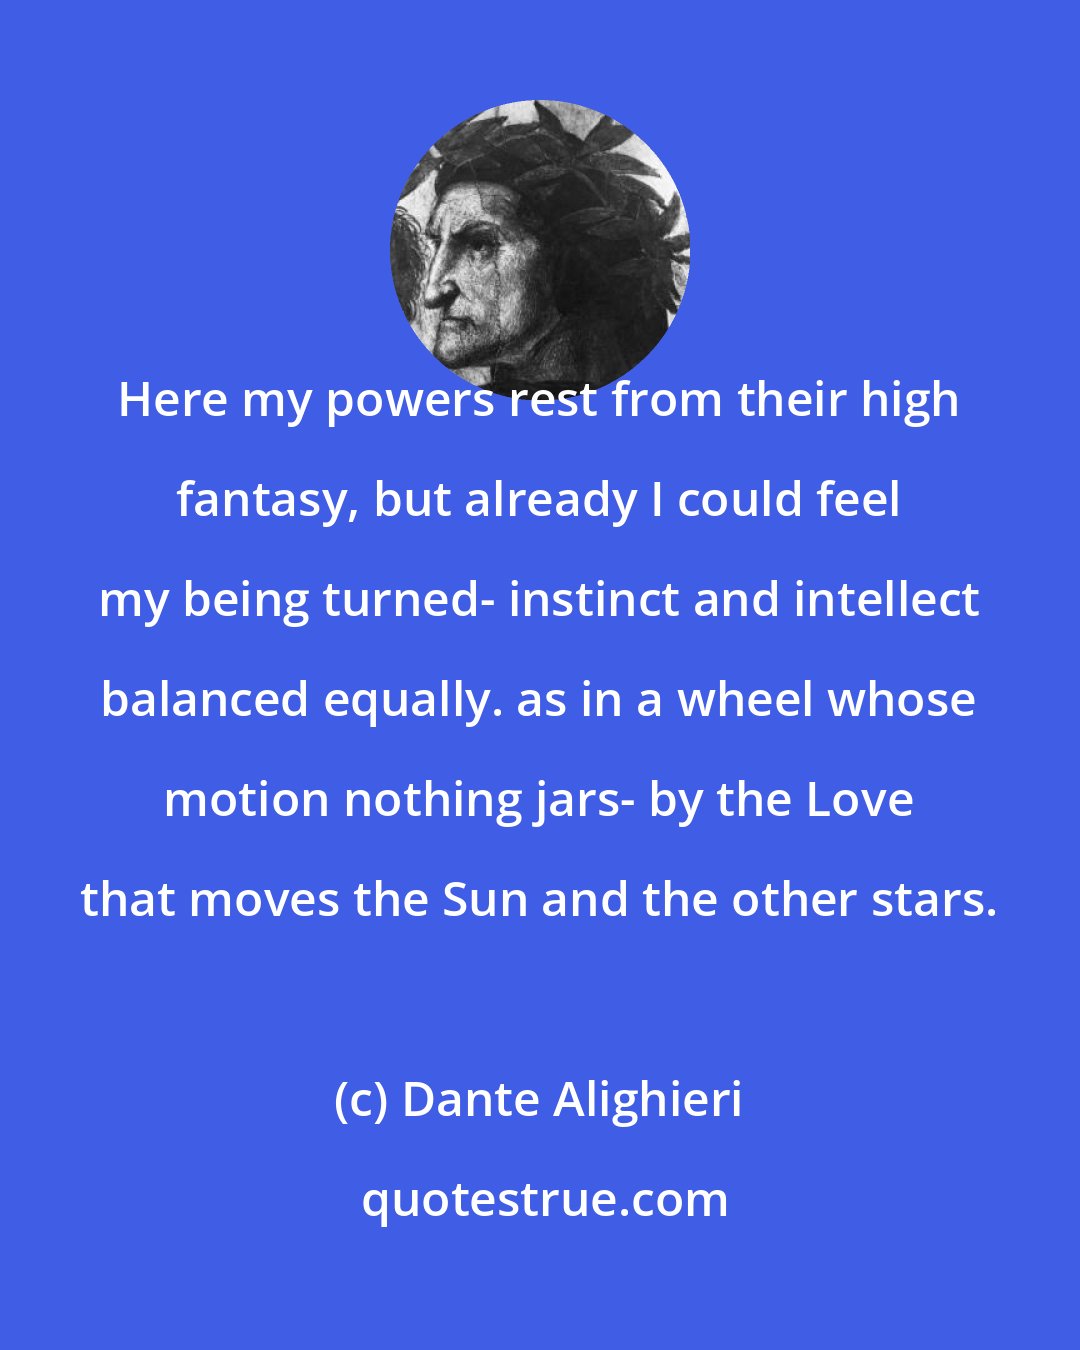 Dante Alighieri: Here my powers rest from their high fantasy, but already I could feel my being turned- instinct and intellect balanced equally. as in a wheel whose motion nothing jars- by the Love that moves the Sun and the other stars.